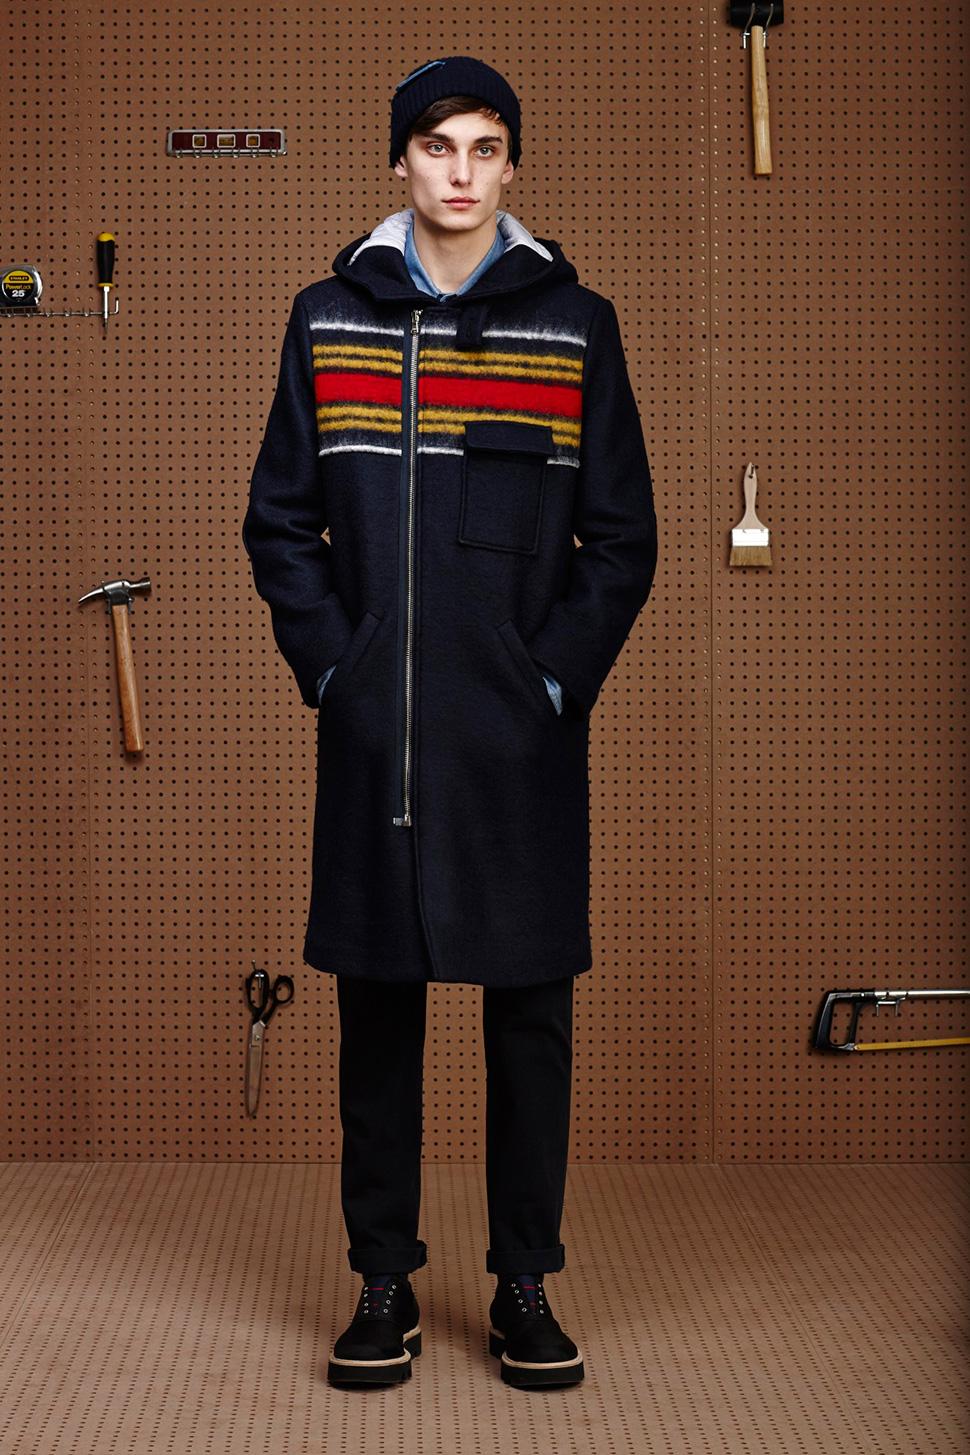 BAND OF OUTSIDERS – F/W 2015 COLLECTION LOOKBOOK